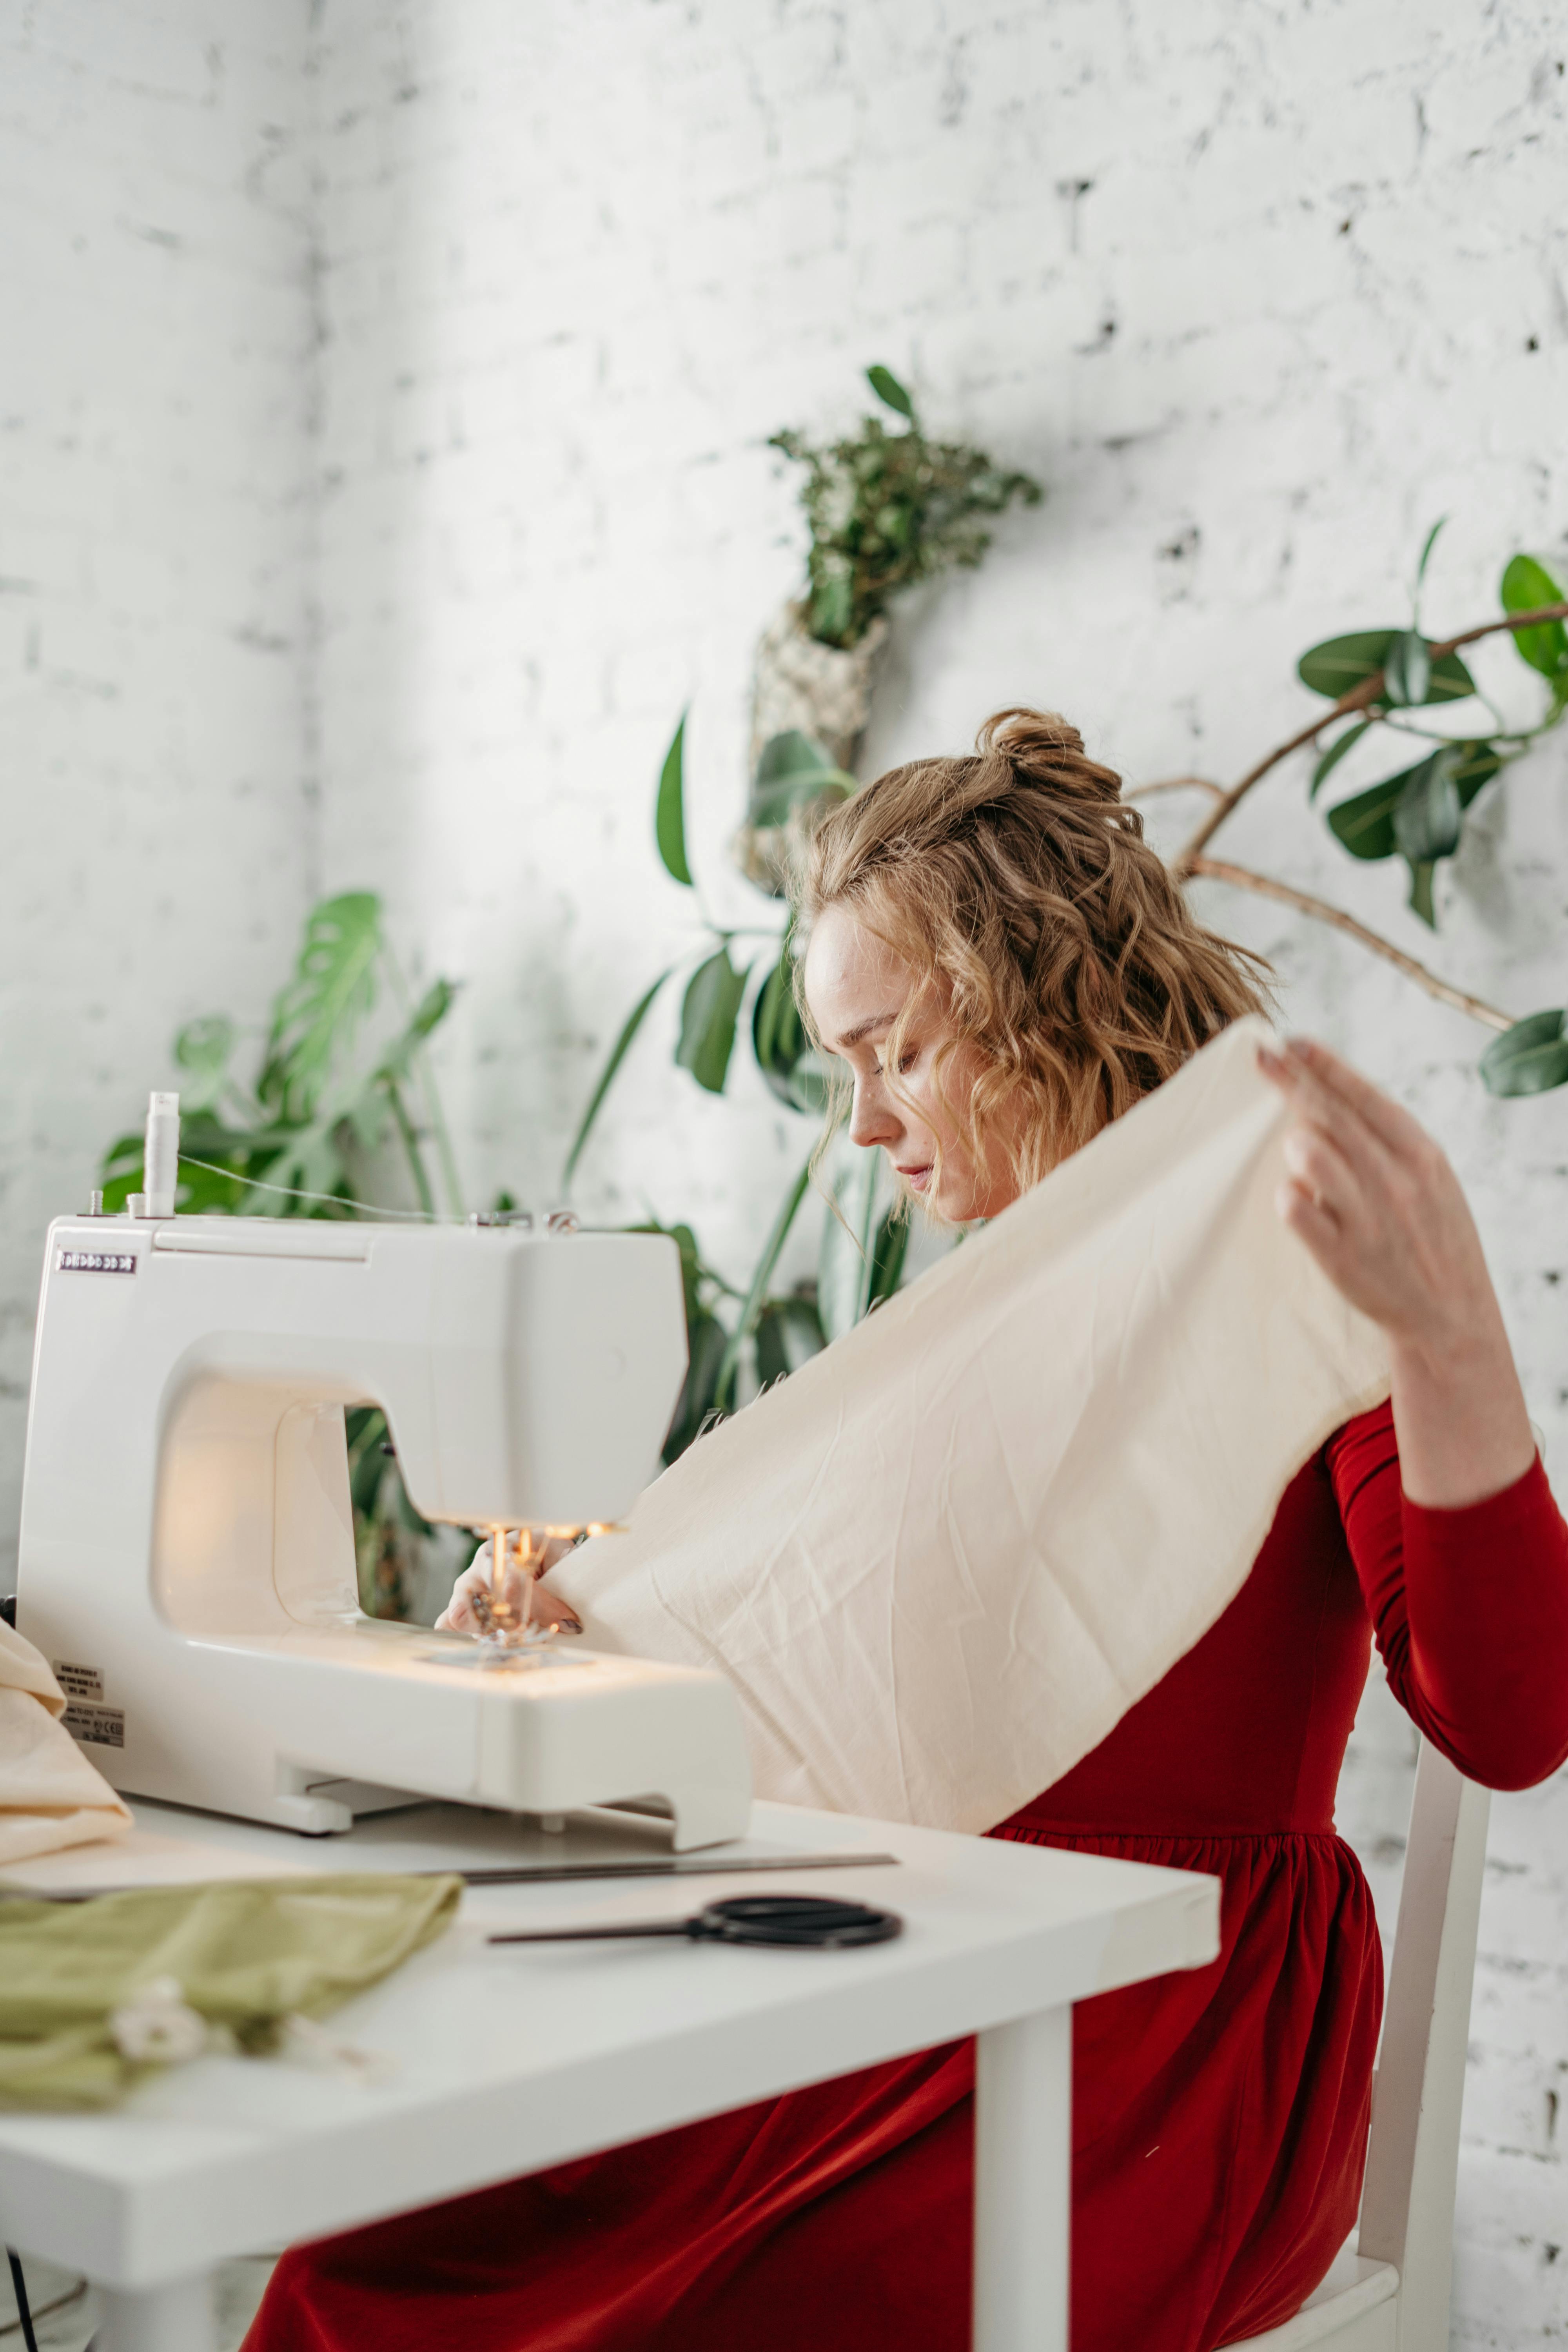 A woman sewing | Source: Pexels